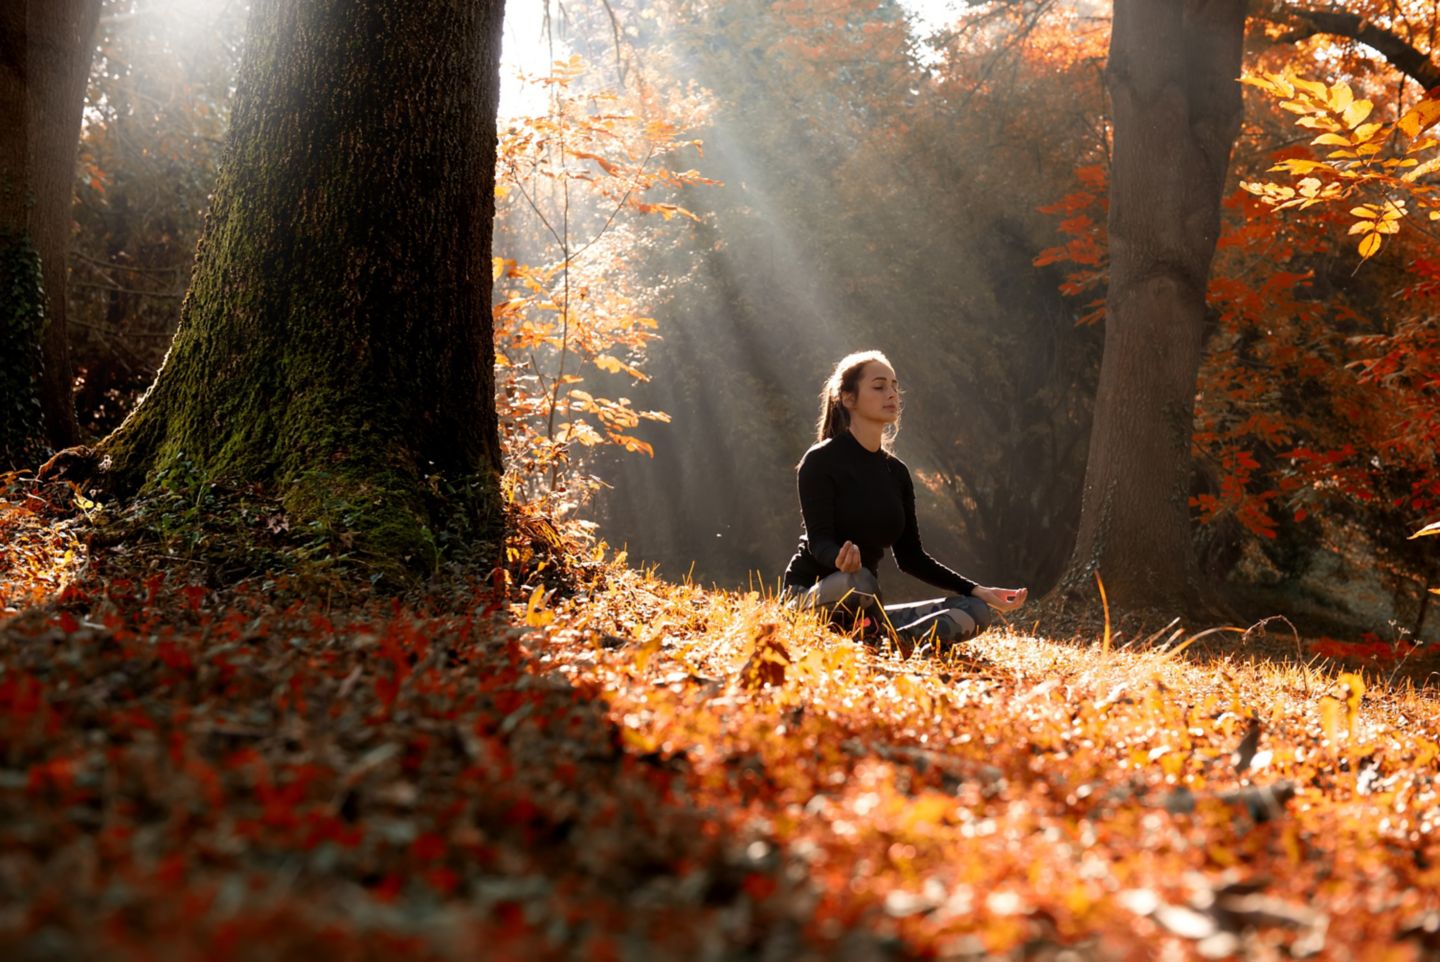 A woman sitting meditating in an autumnal forest